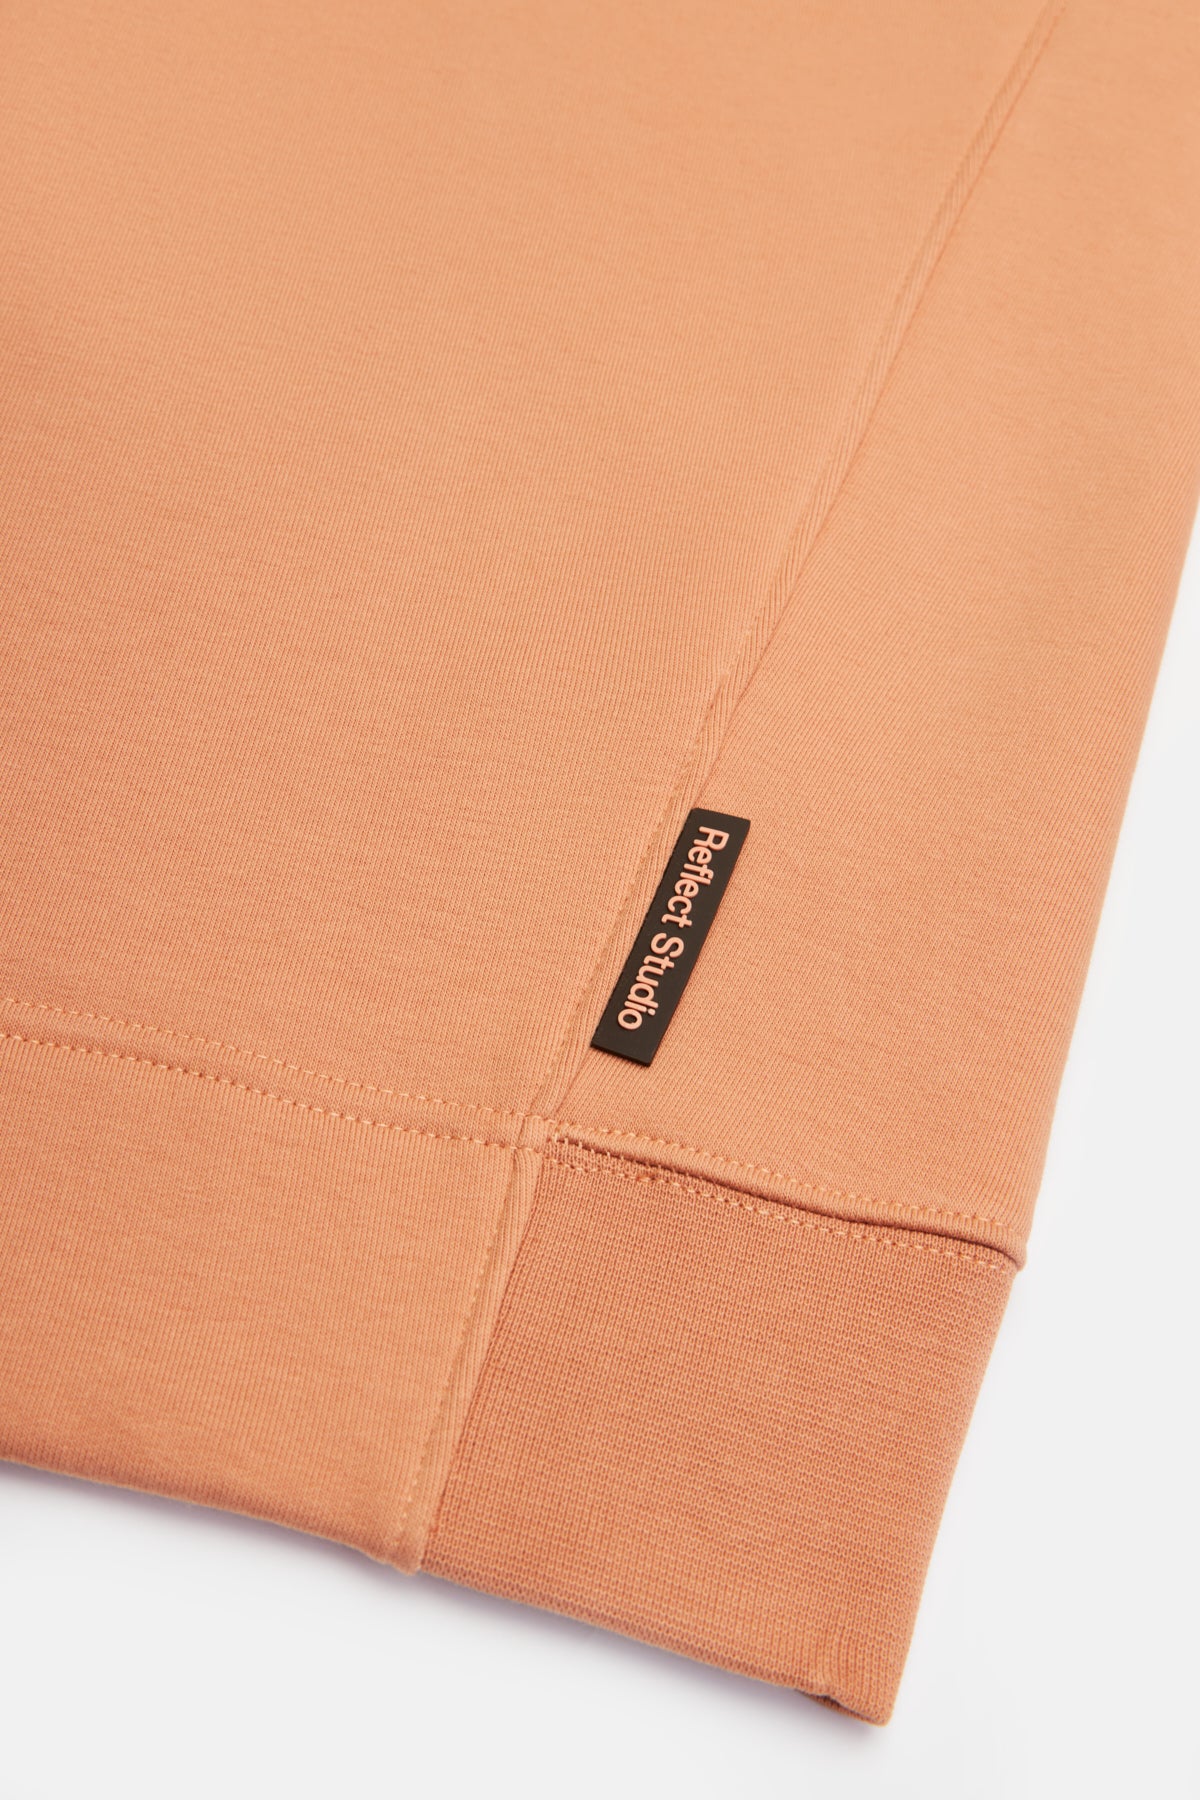 Logo Tag Relaxed Fit Hoodie - Dusted Peach